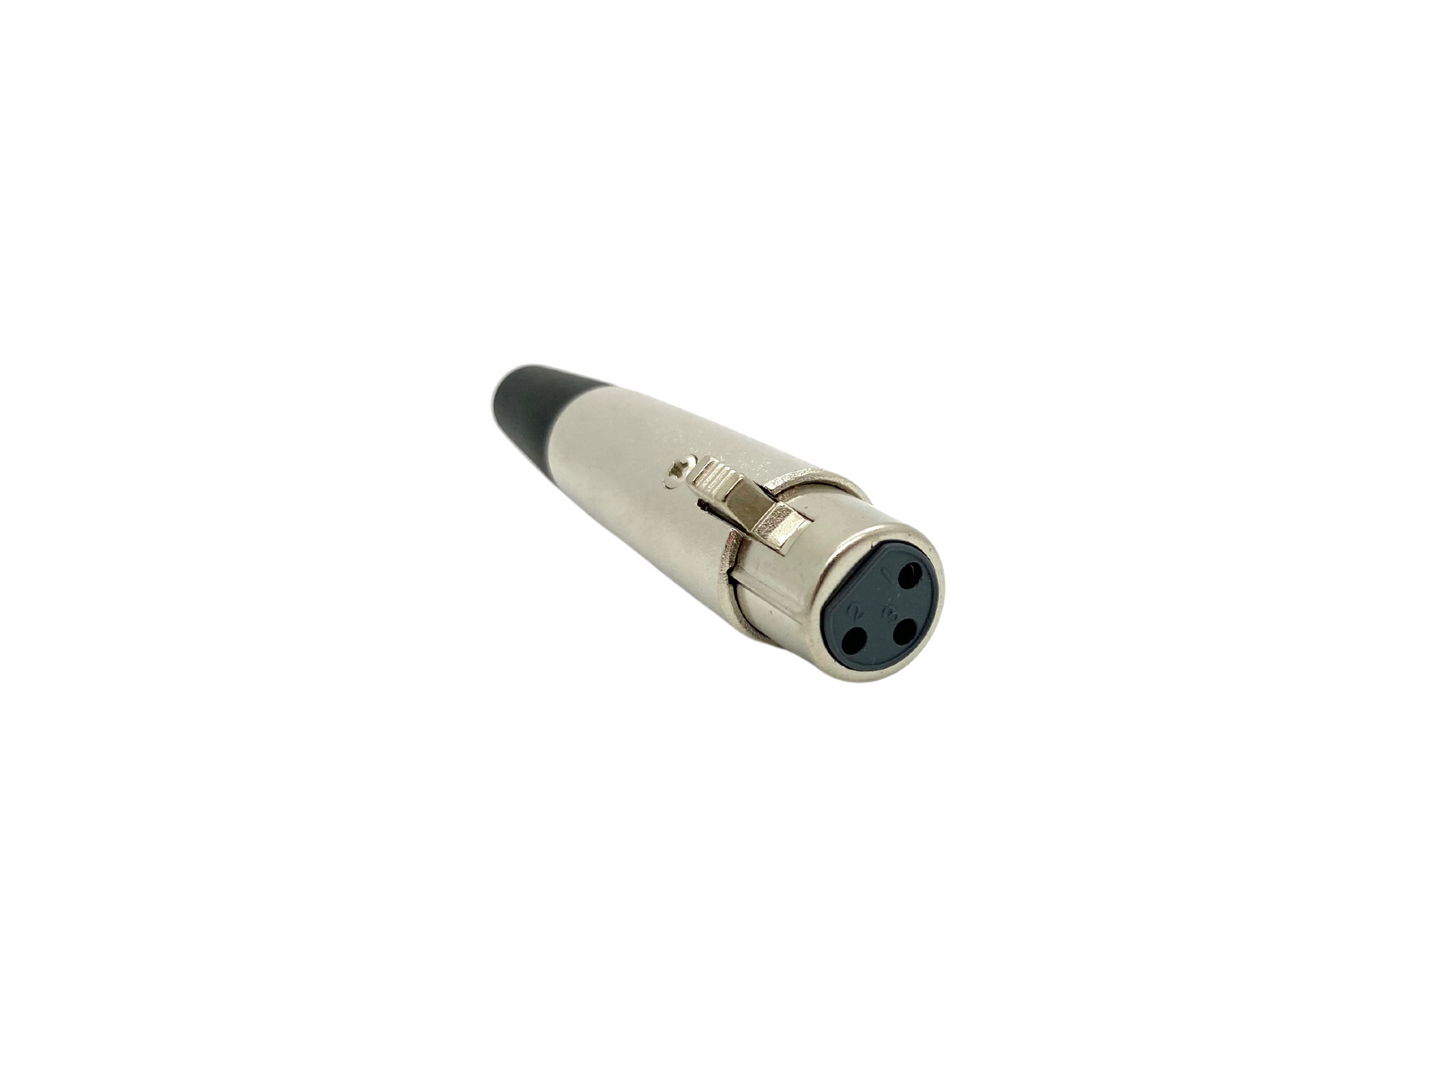 XLR Female 3 Pole Audio Cable Connector Budget - Nickel